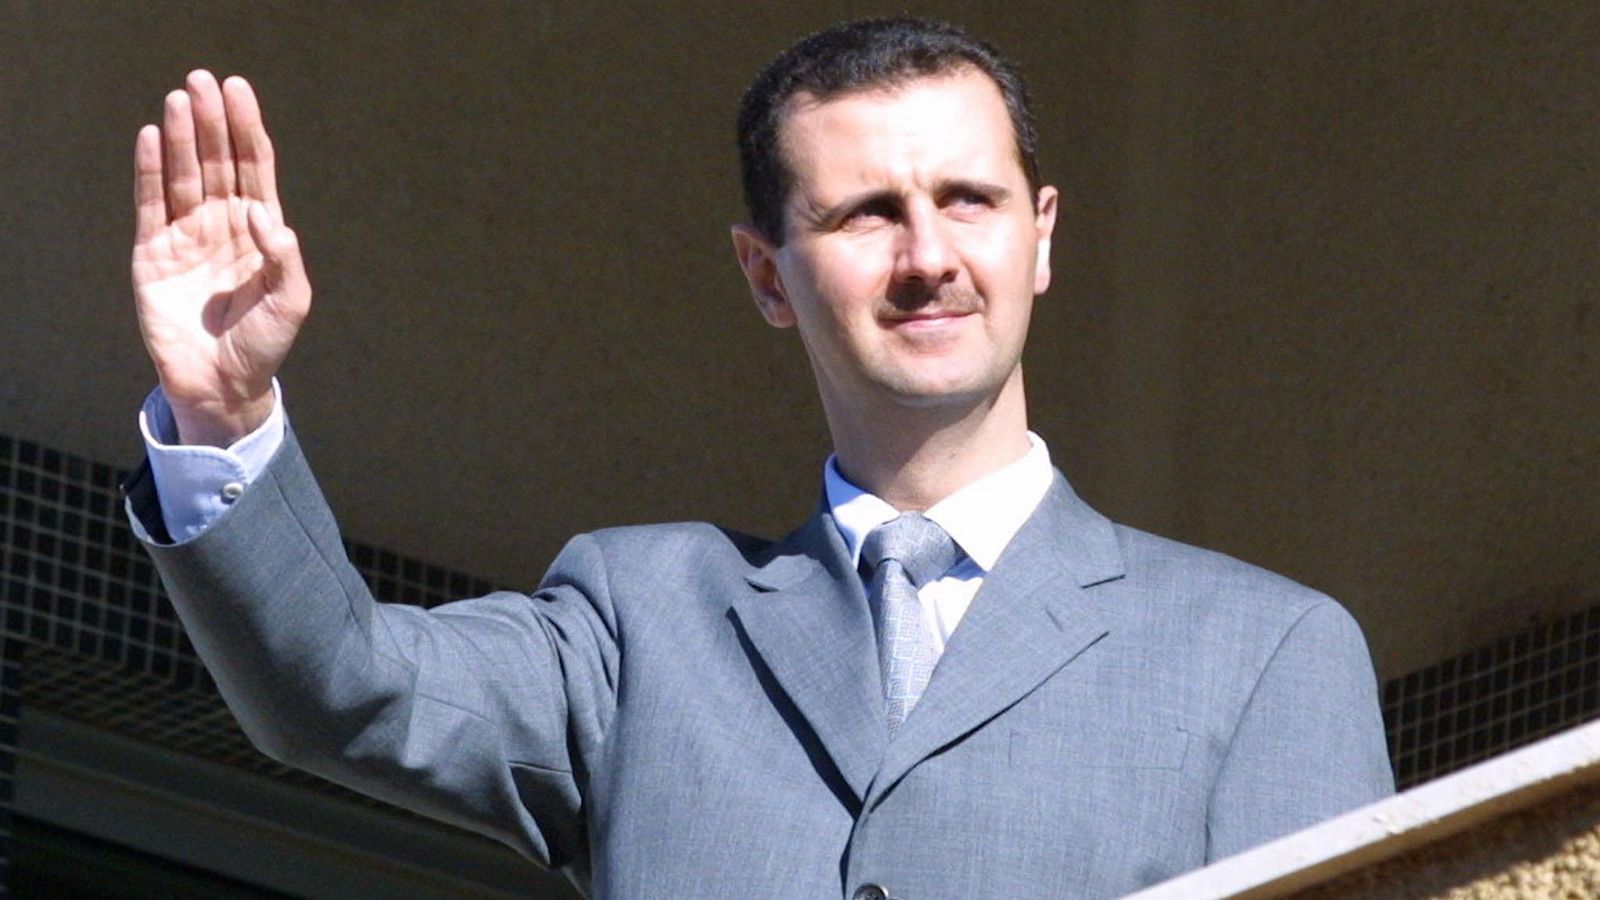 Syria’s Assad is no longer a ‘pariah’ in the Arab world